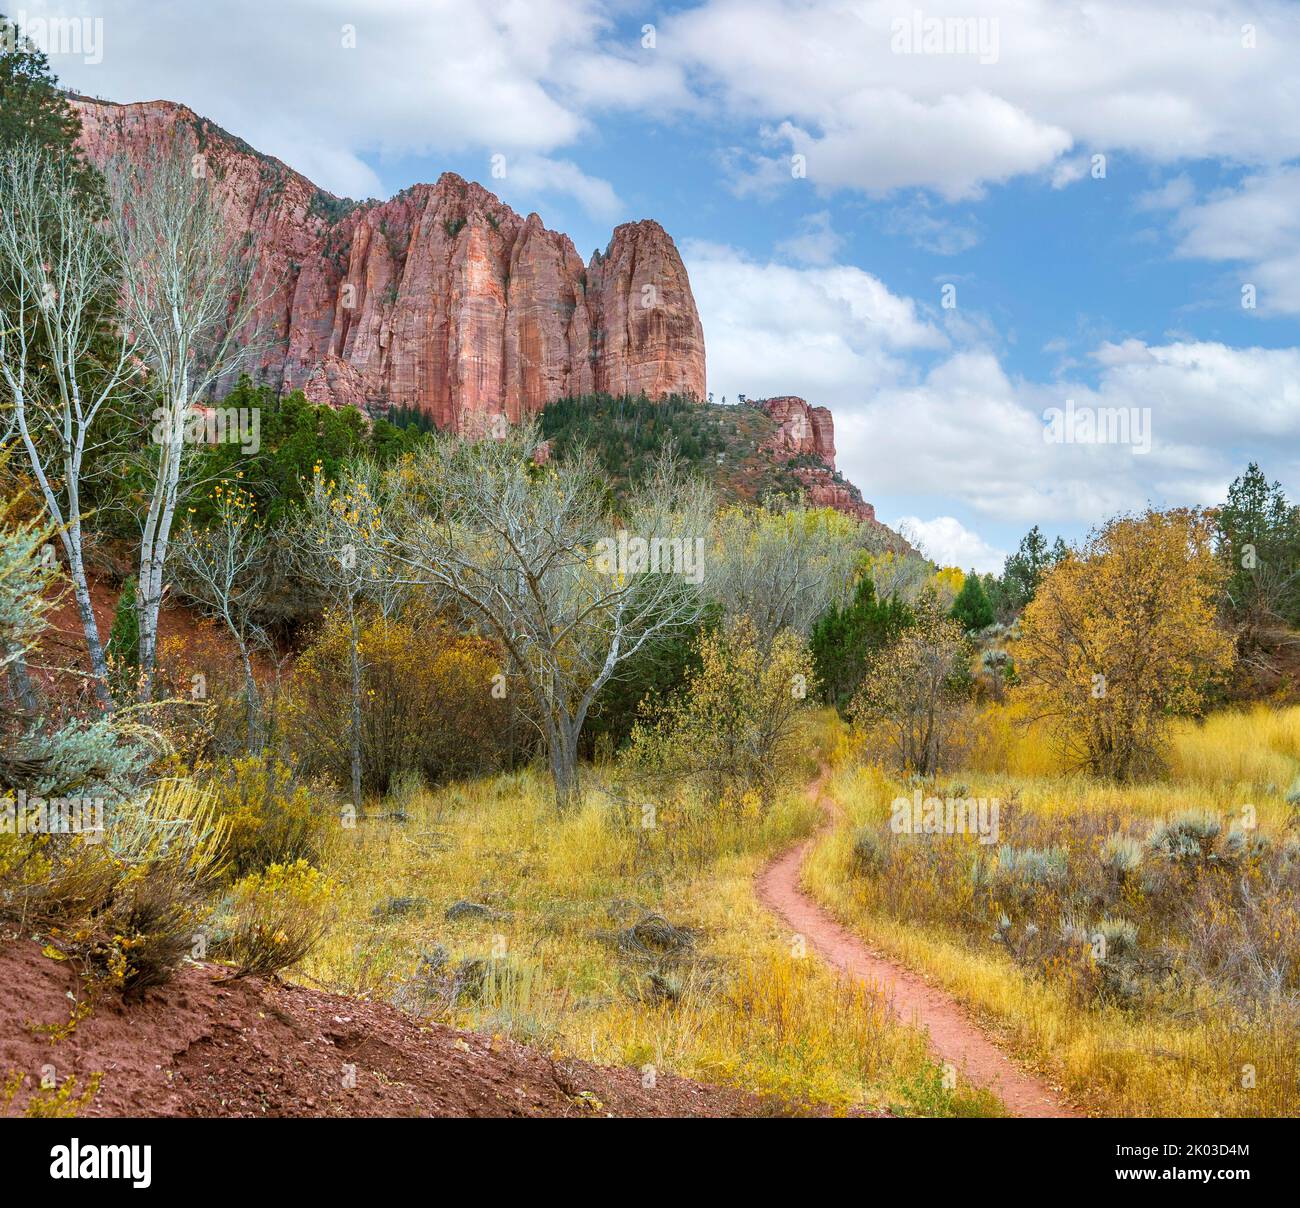 Zion National Park is located in southwestern Utah on the border with Arizona. It has an area of 579 kö² and lies between 1128 m and 2660 m altitude. Autumn landscape at La Verkin Creek Trail near Shuntavi Butte, Timber Top Mountain. Stock Photo